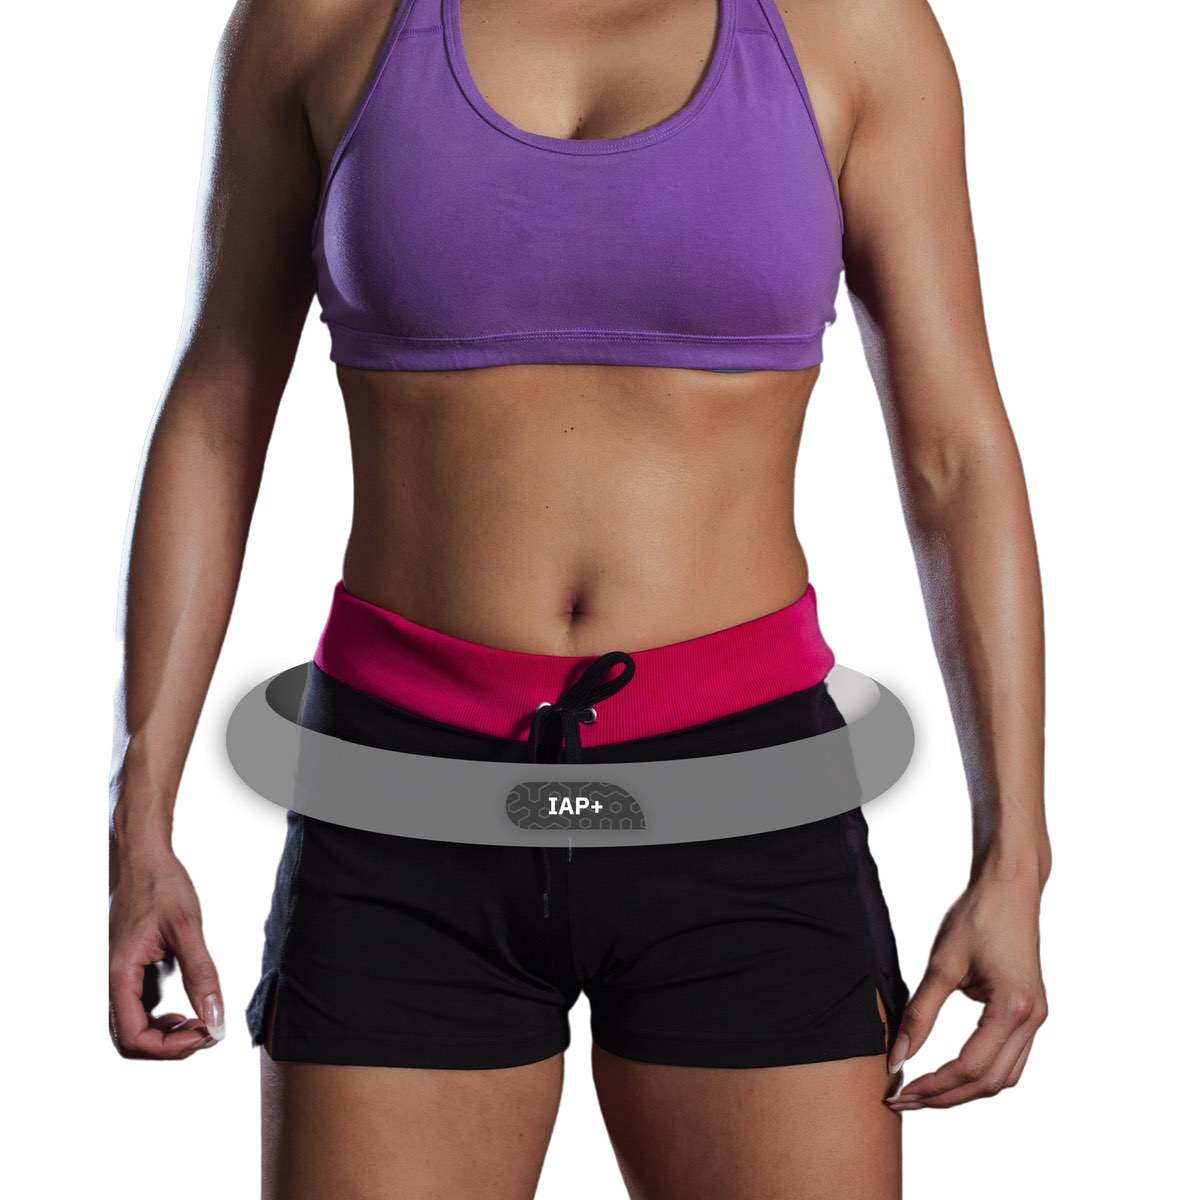 New Saturn - 360 AB BELT now available. Essential for proper